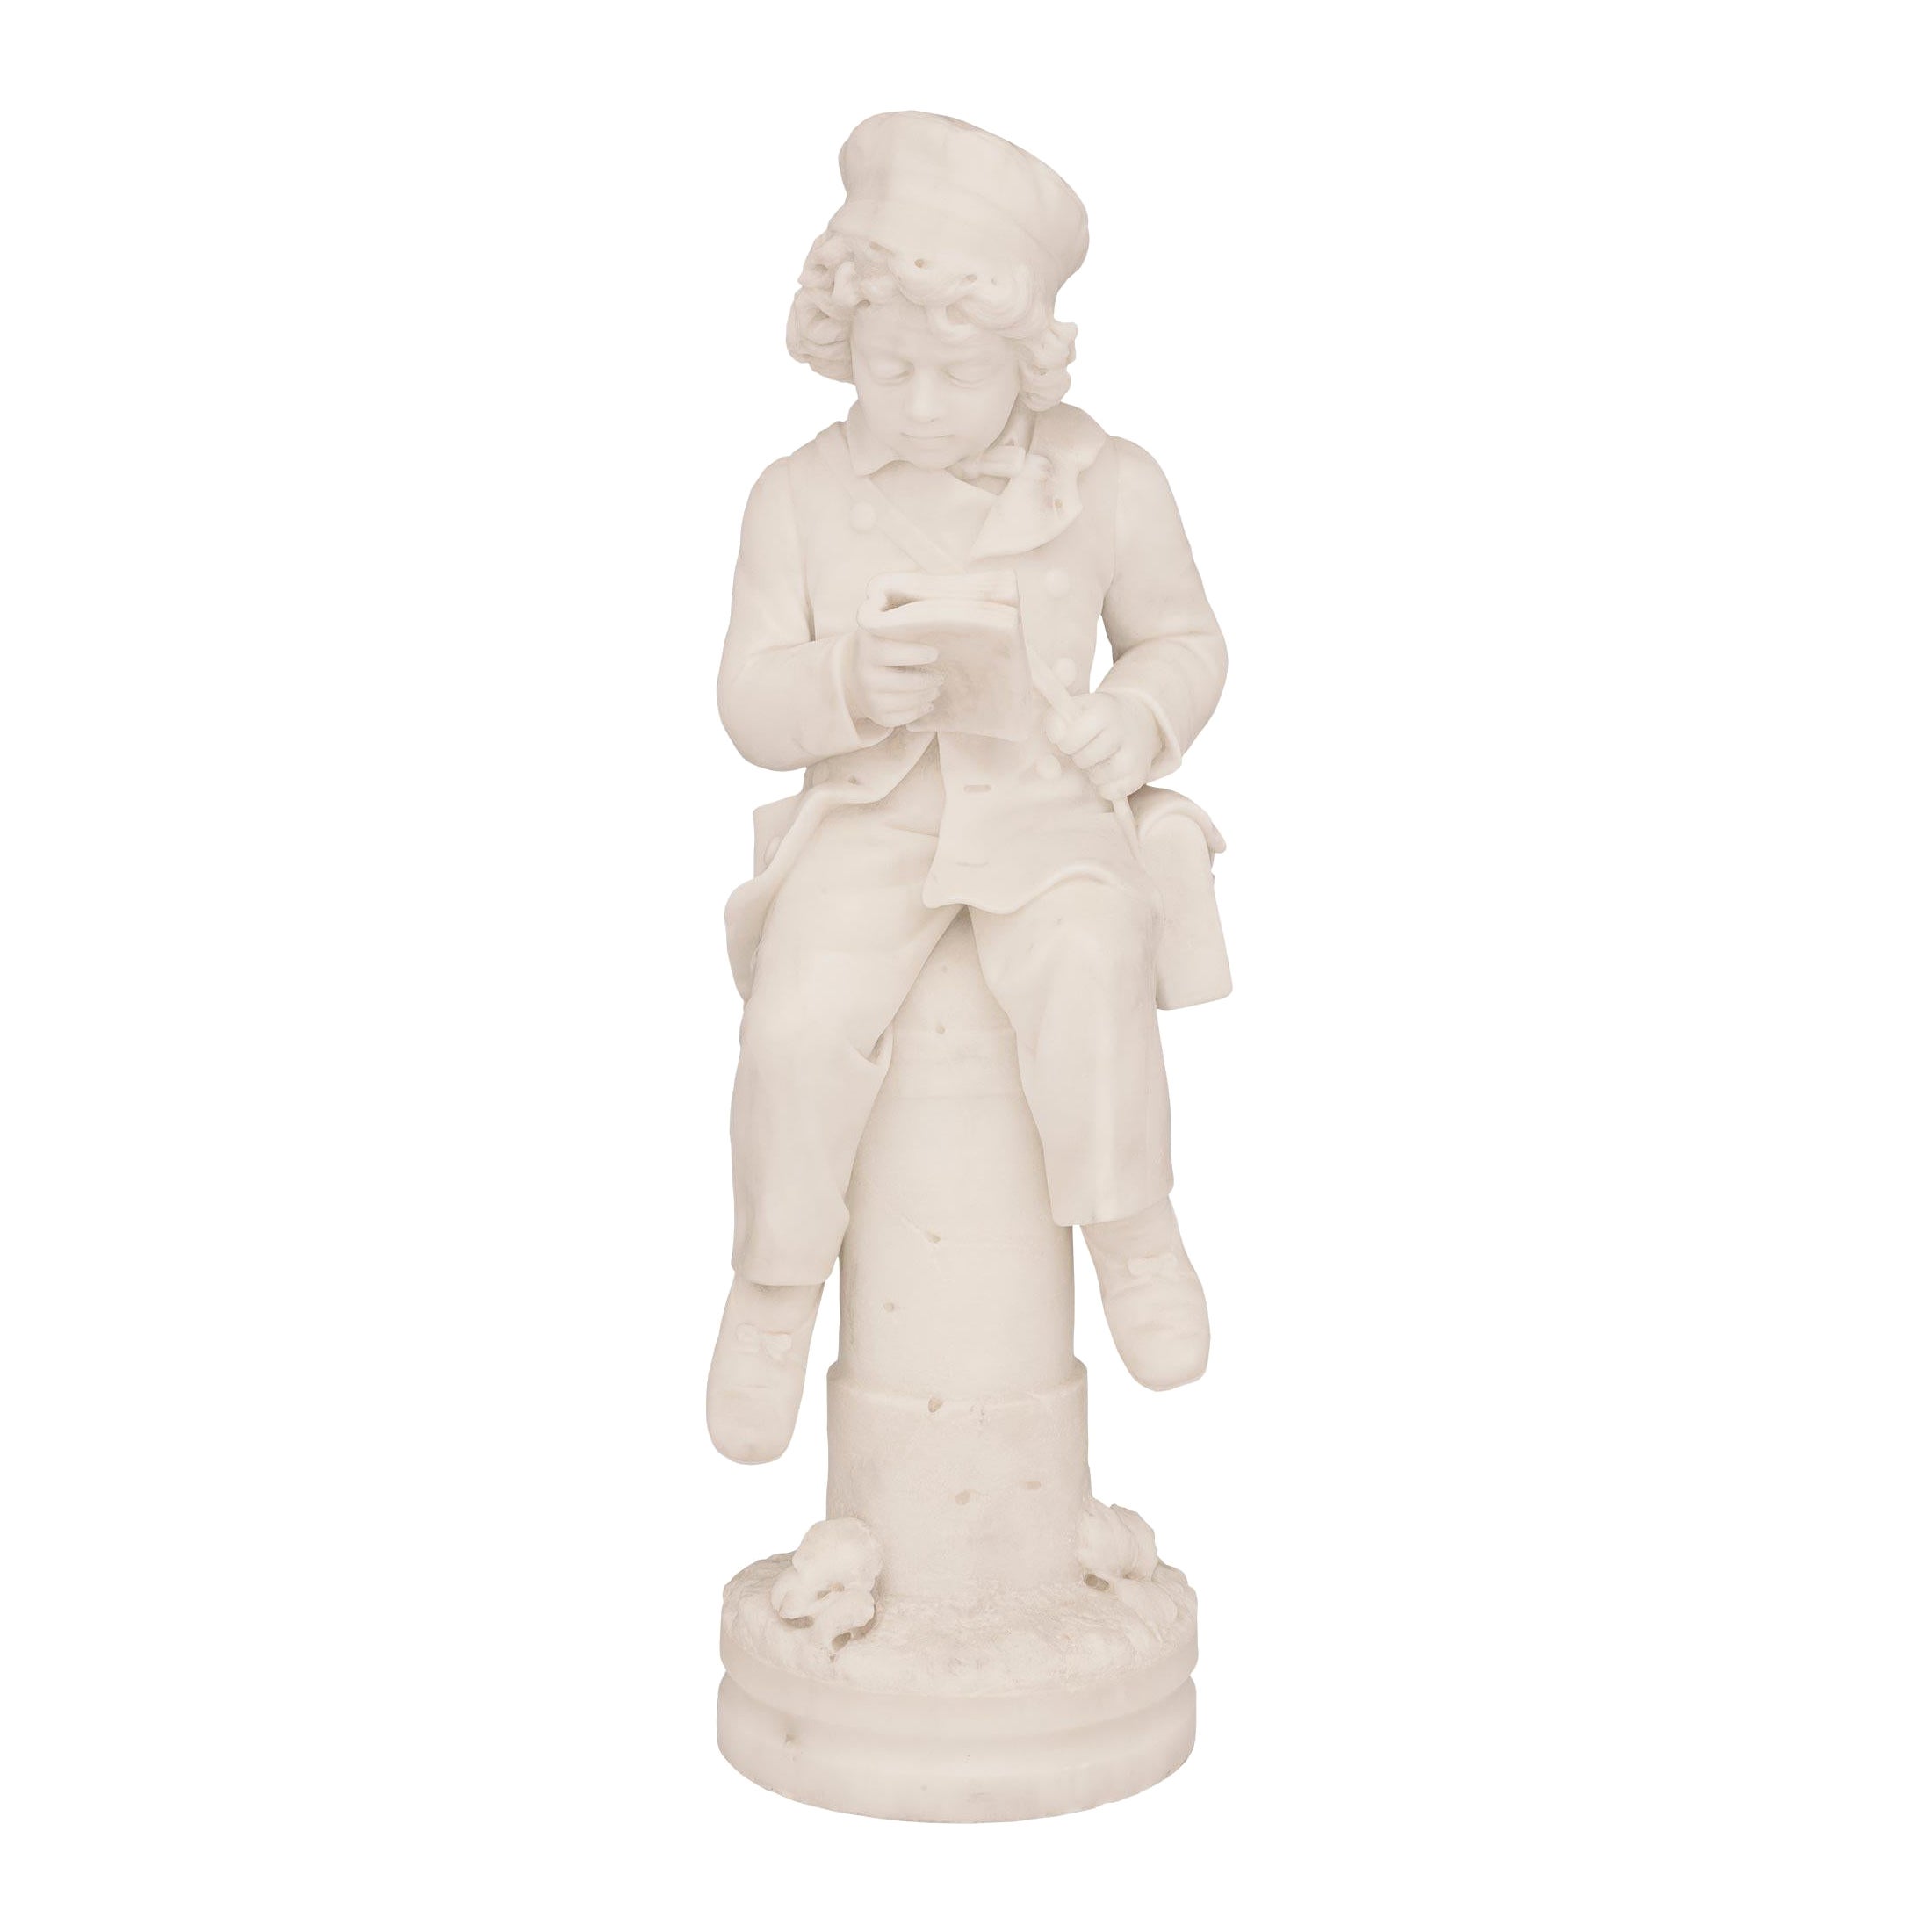 Italian 19th Century White Carrara Marble Statue of a Young Boy Reading a Book